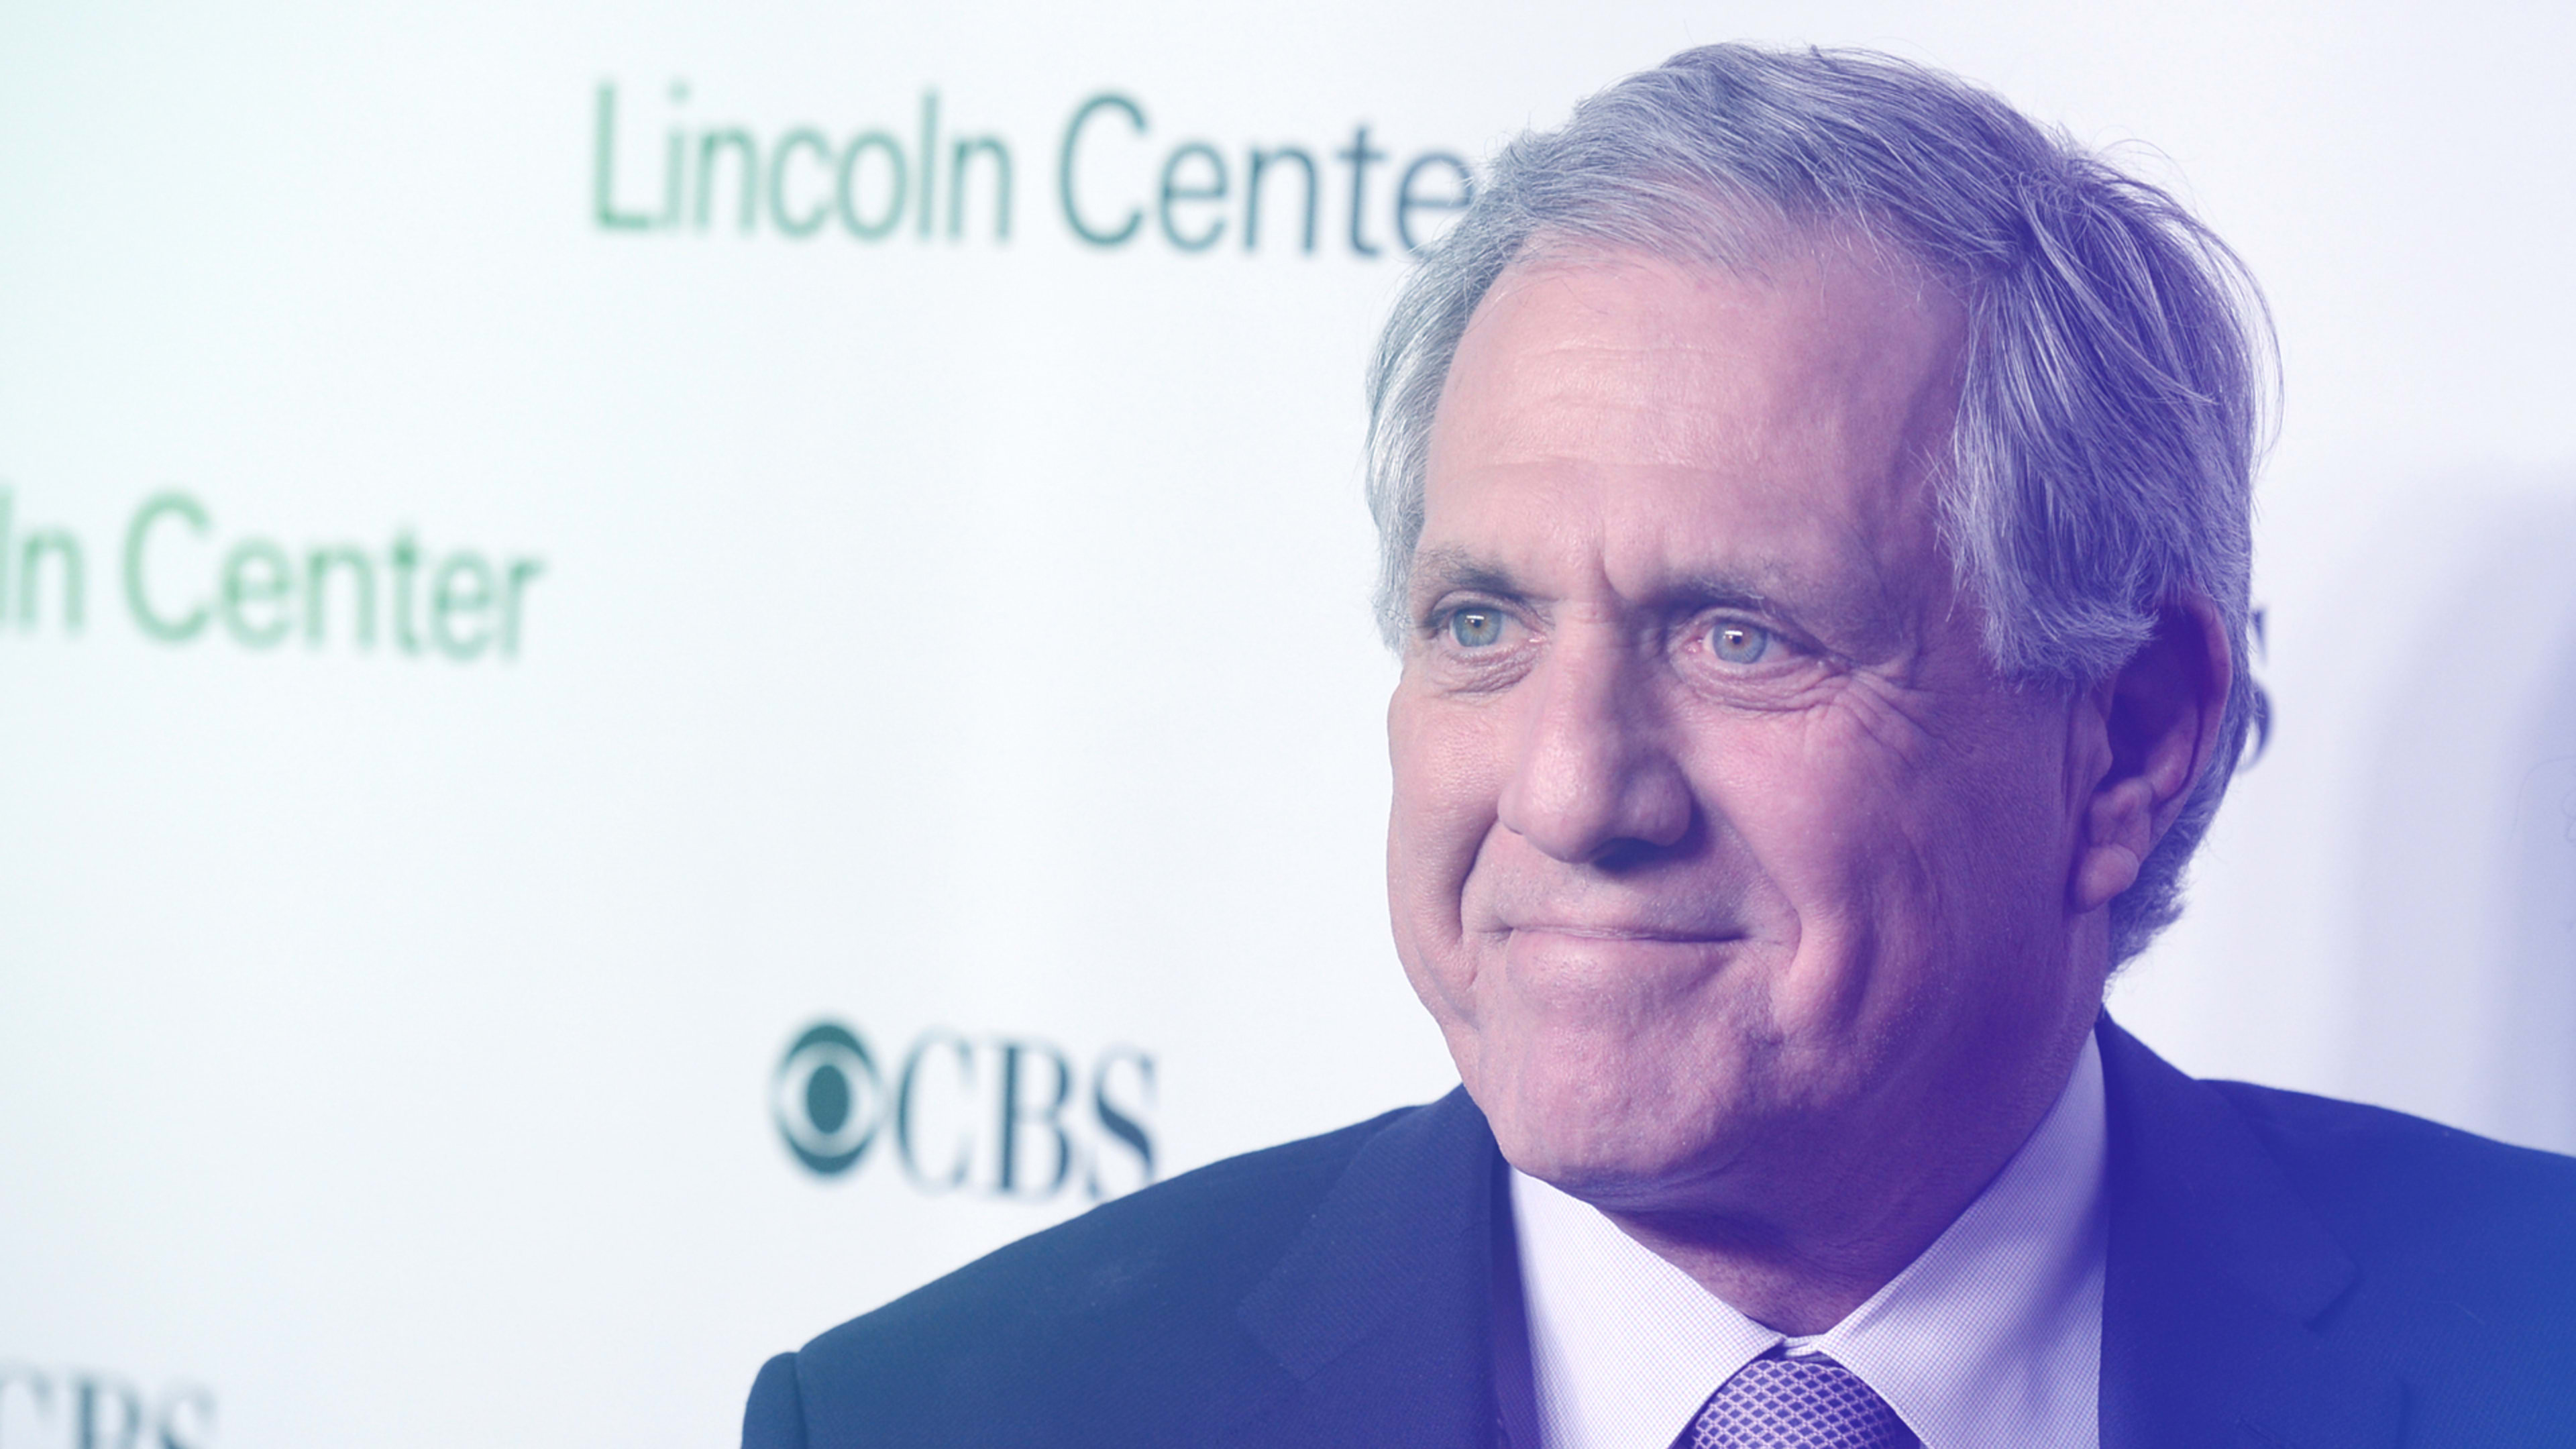 CBS boss Les Moonves accused of sexual harassment—here’s the story